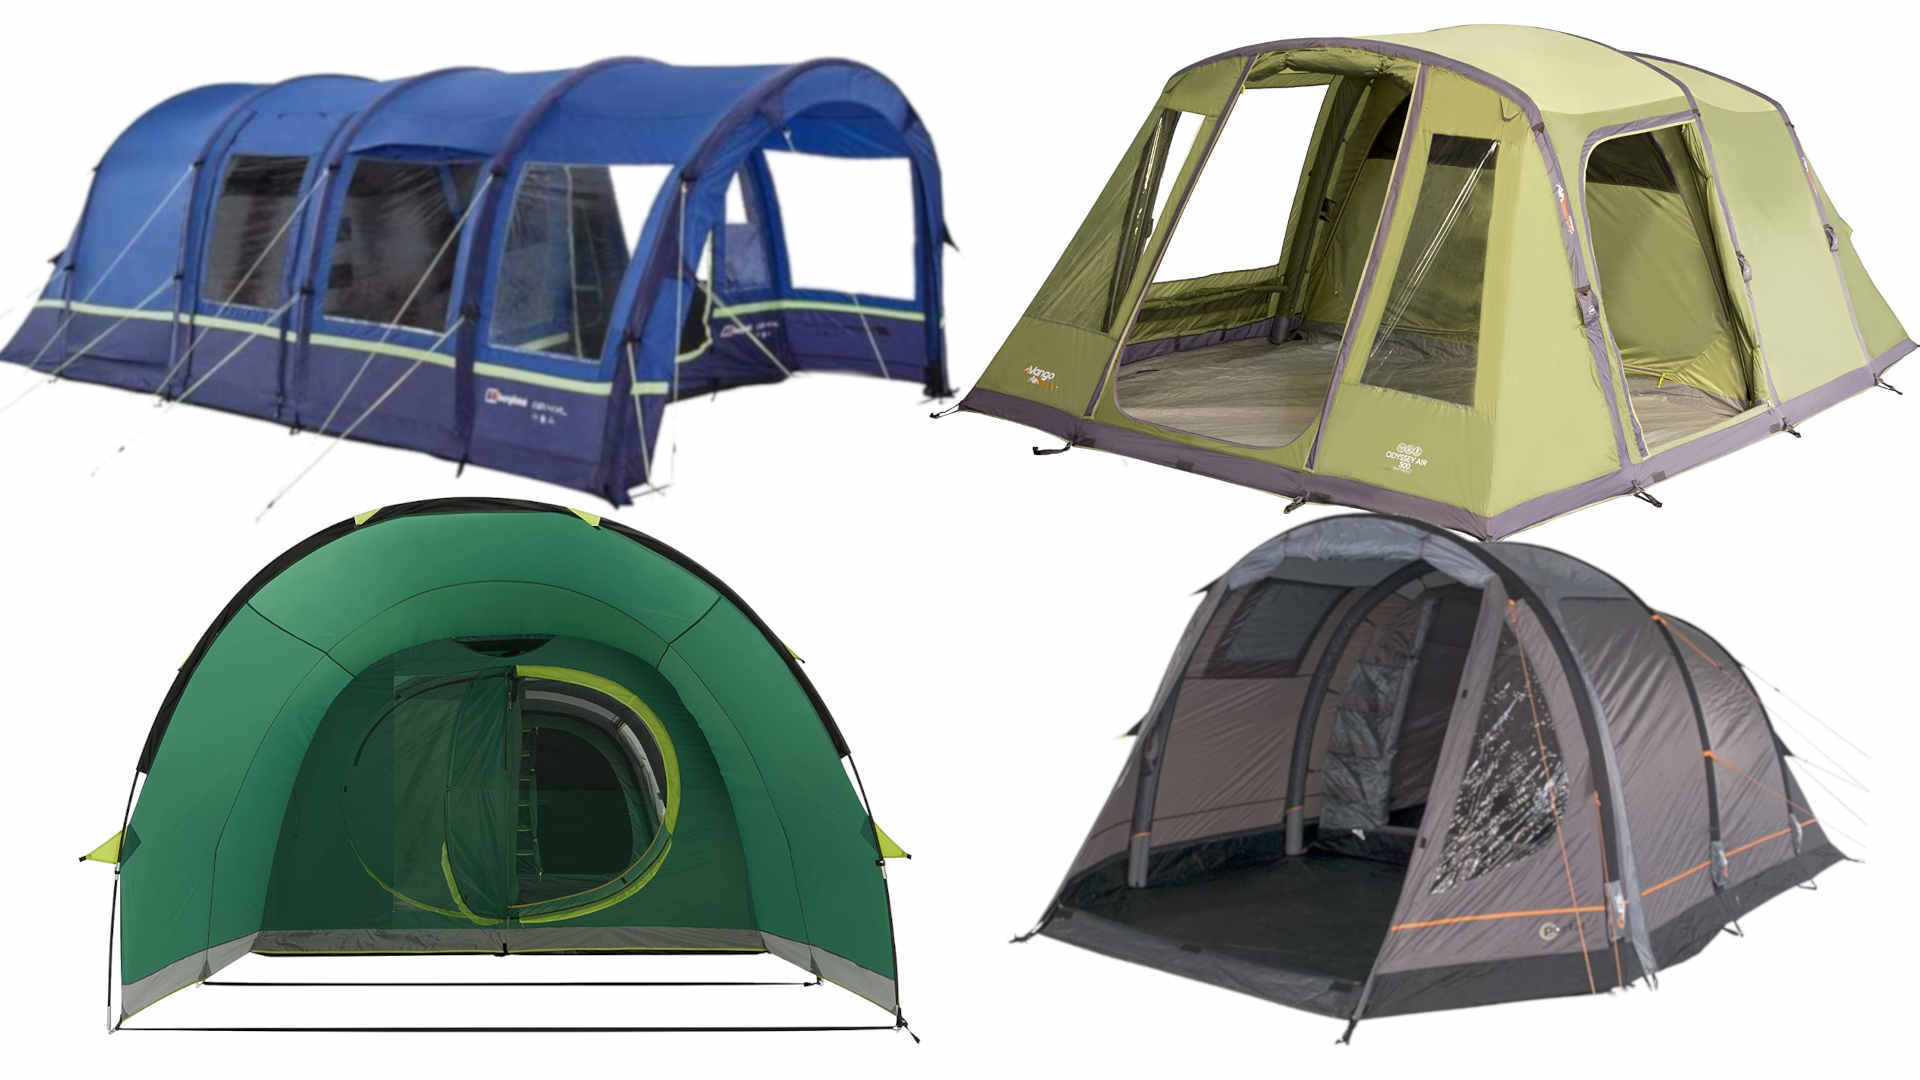 Best value airbeam tents for 2021